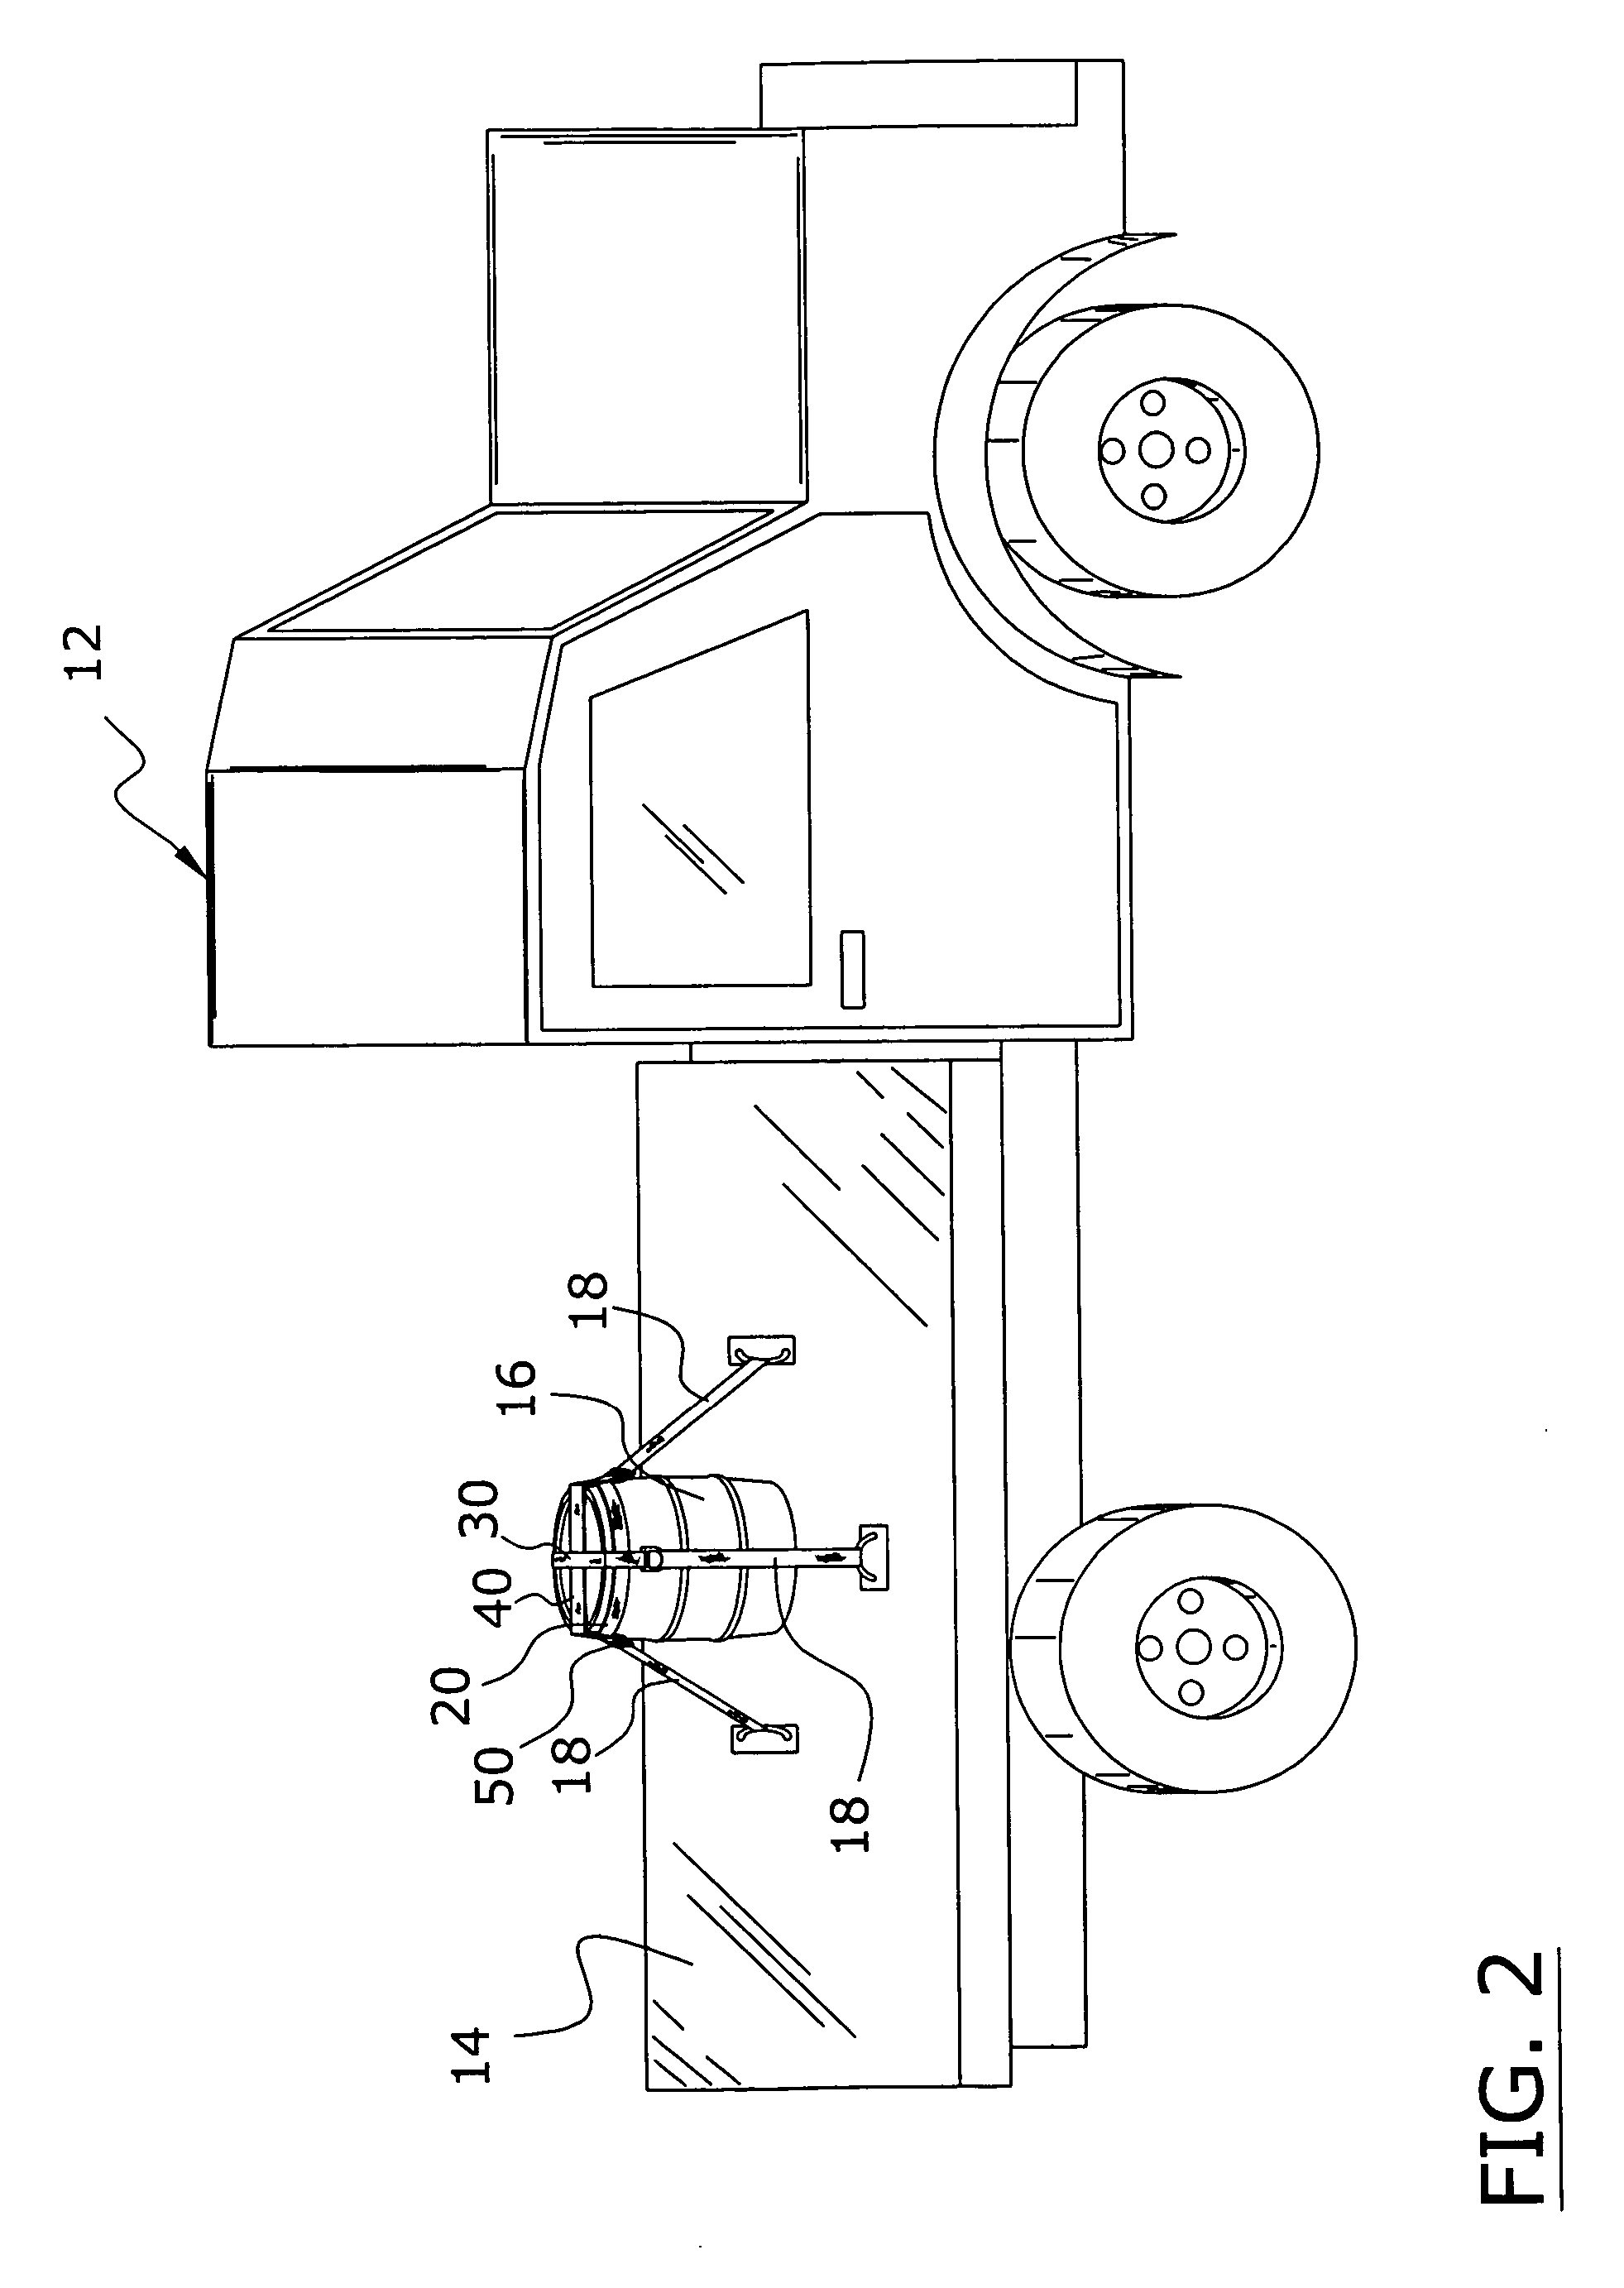 Container securing system